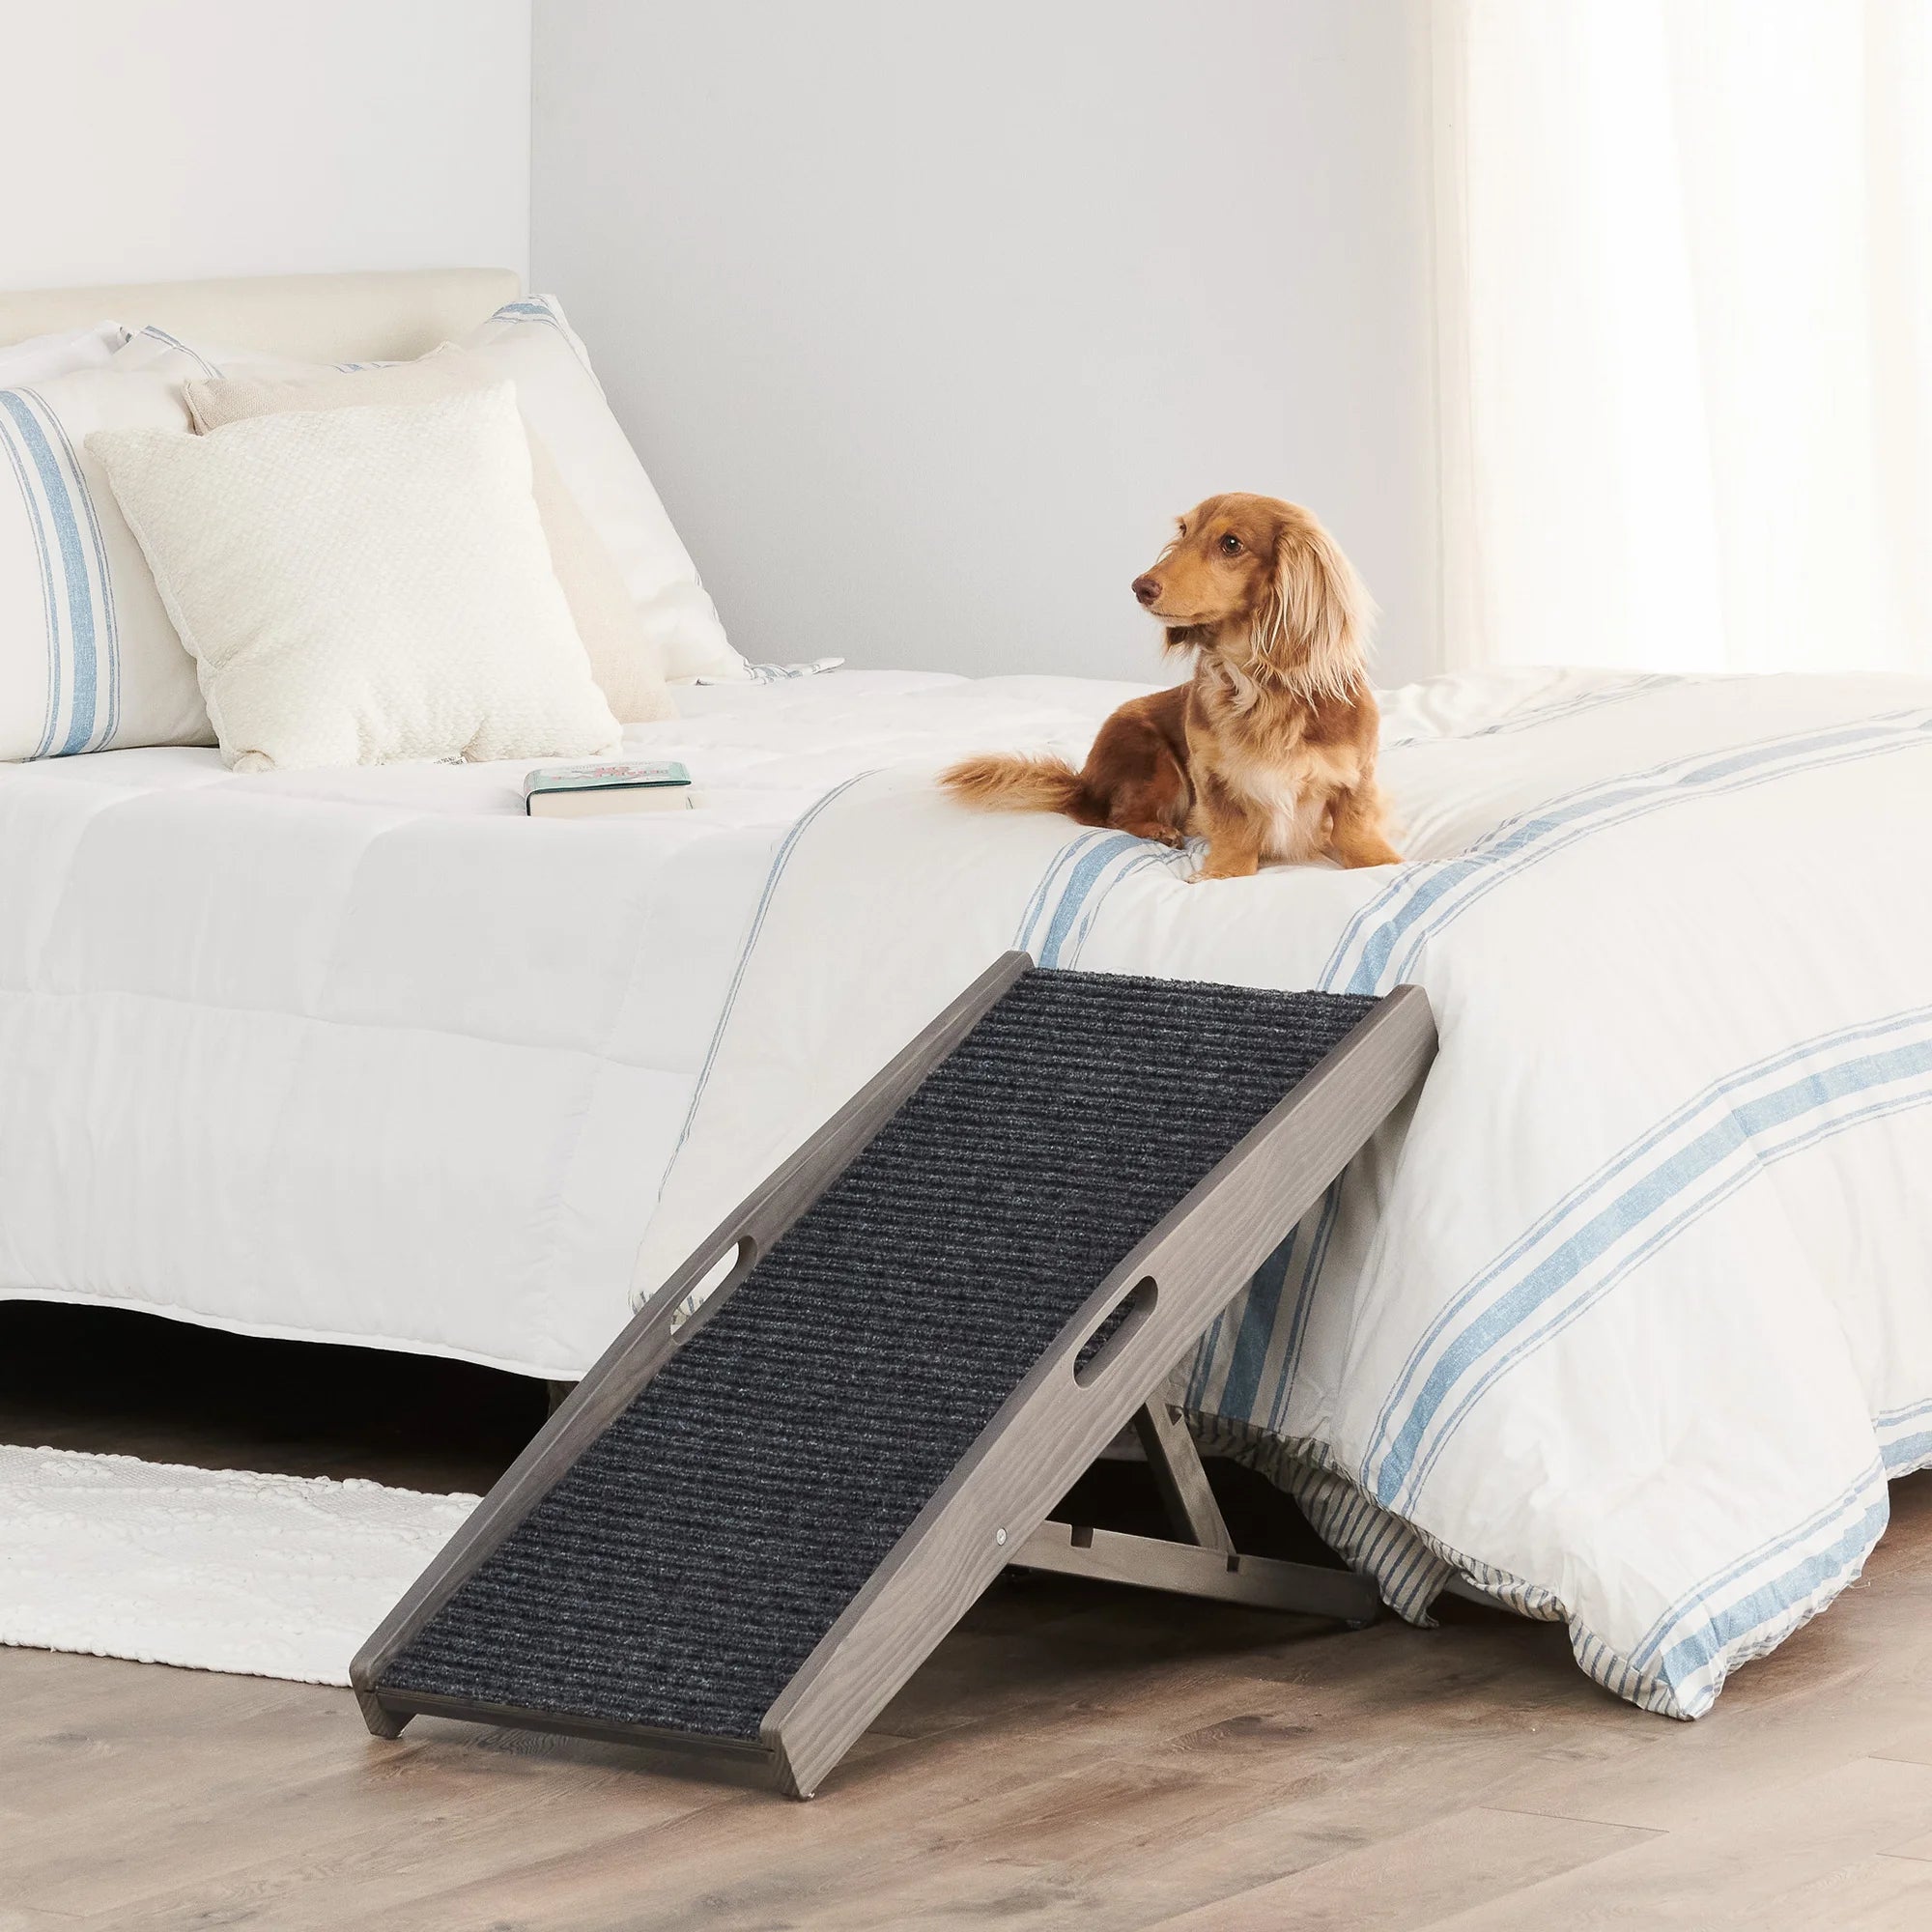 Small dog sitting on bed next to Gray Indoor Pet Ramp.